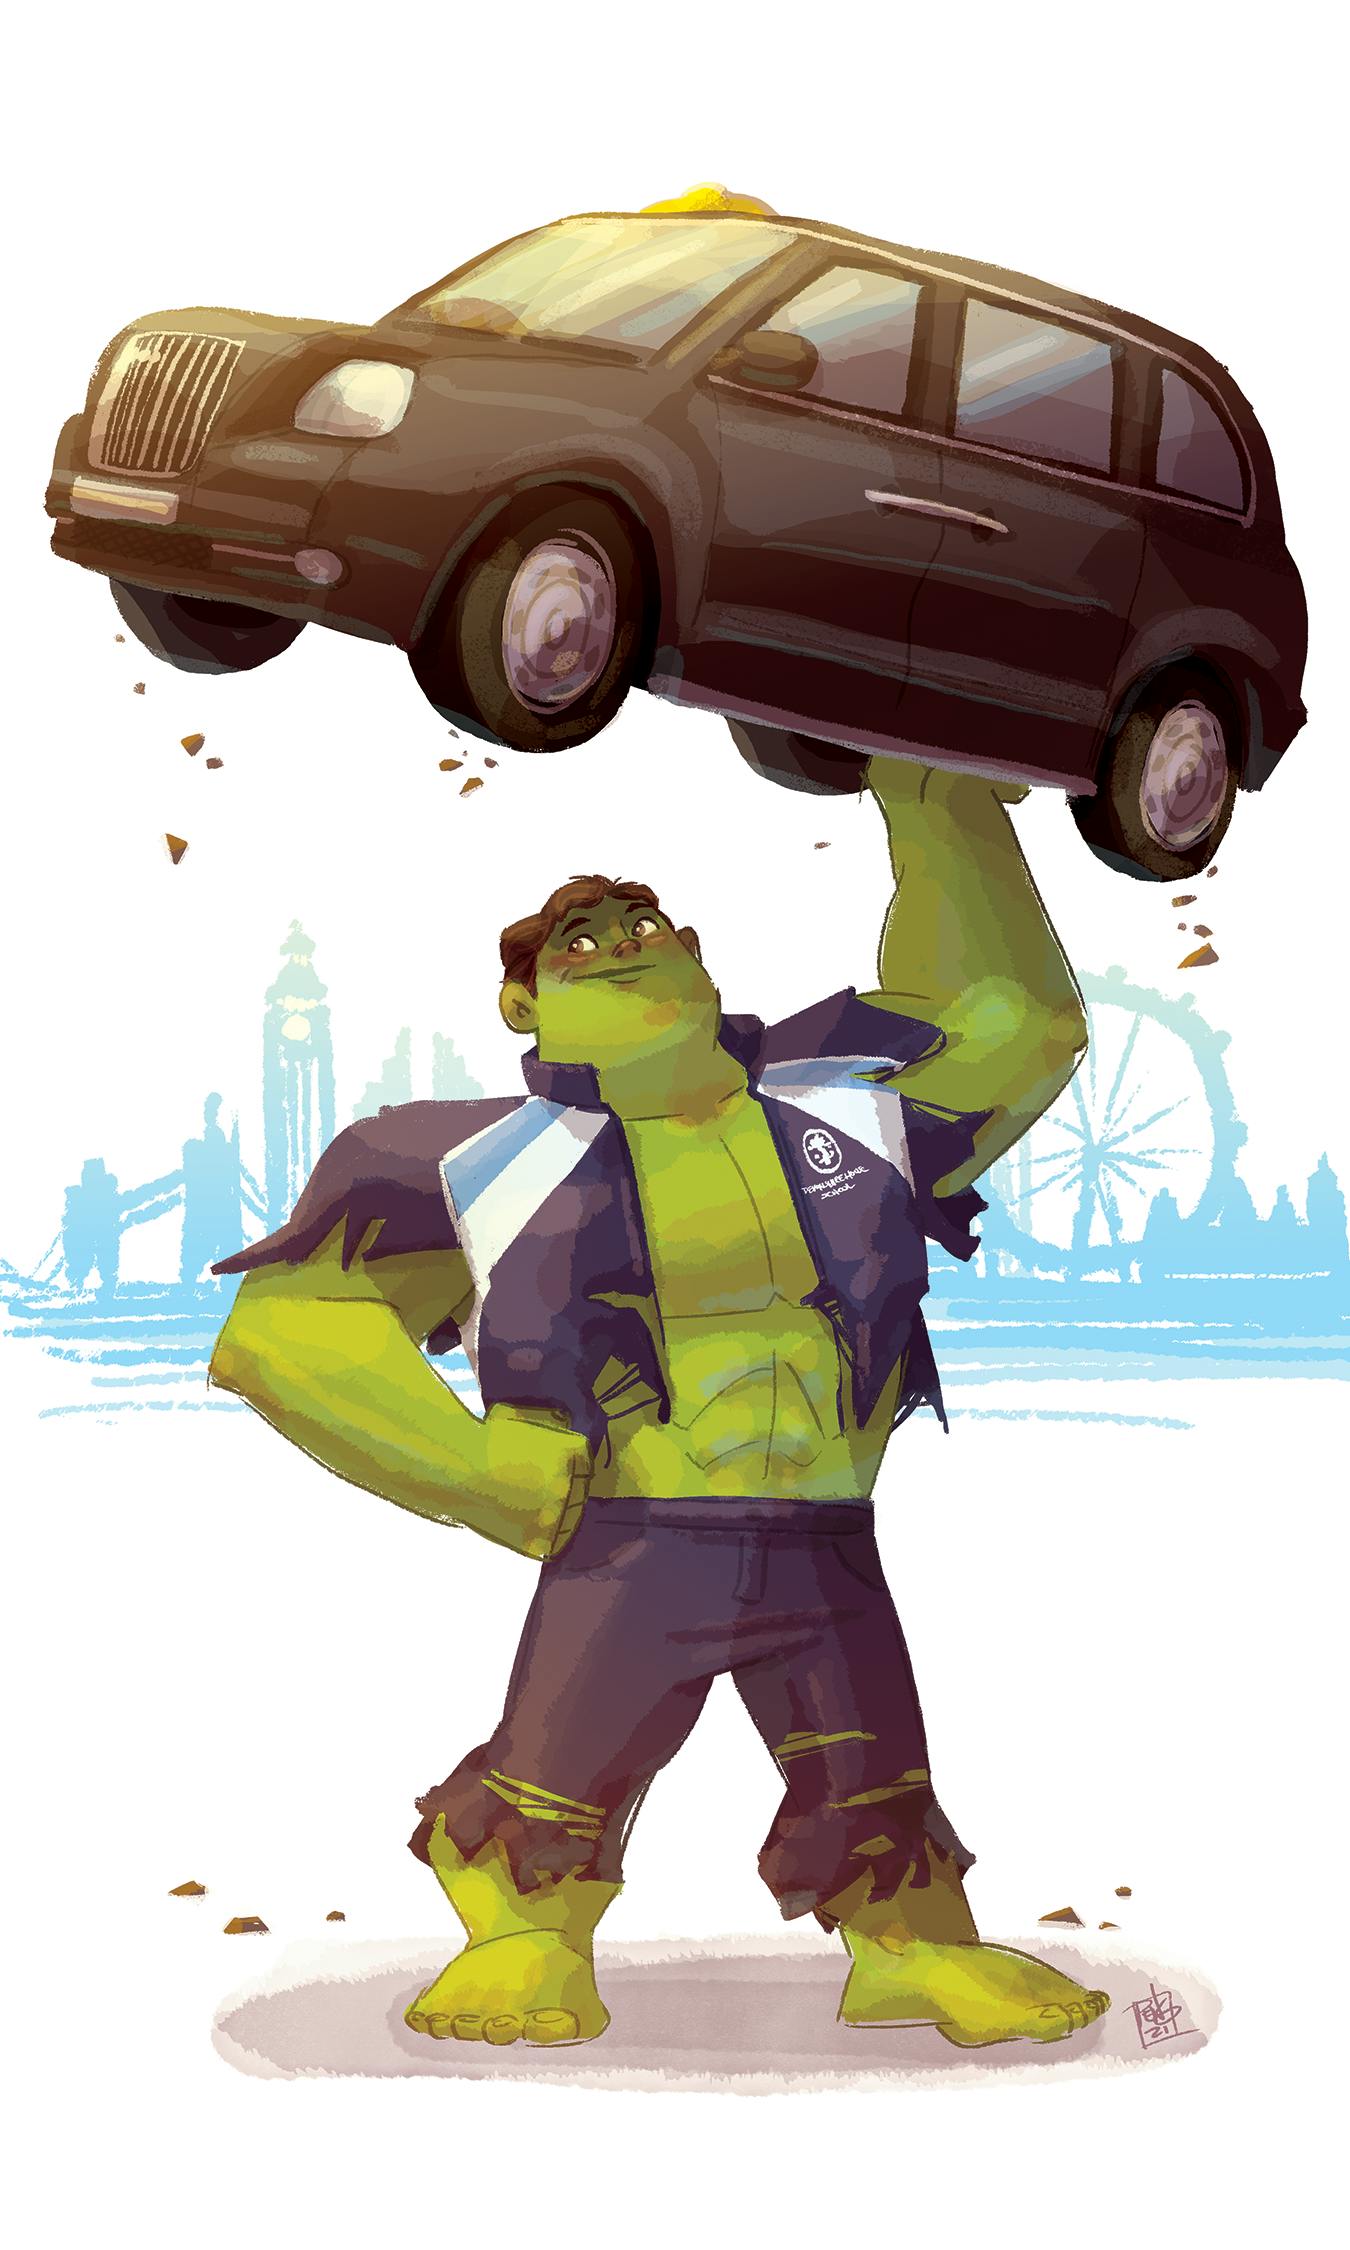 The Hulk holding a car over his head